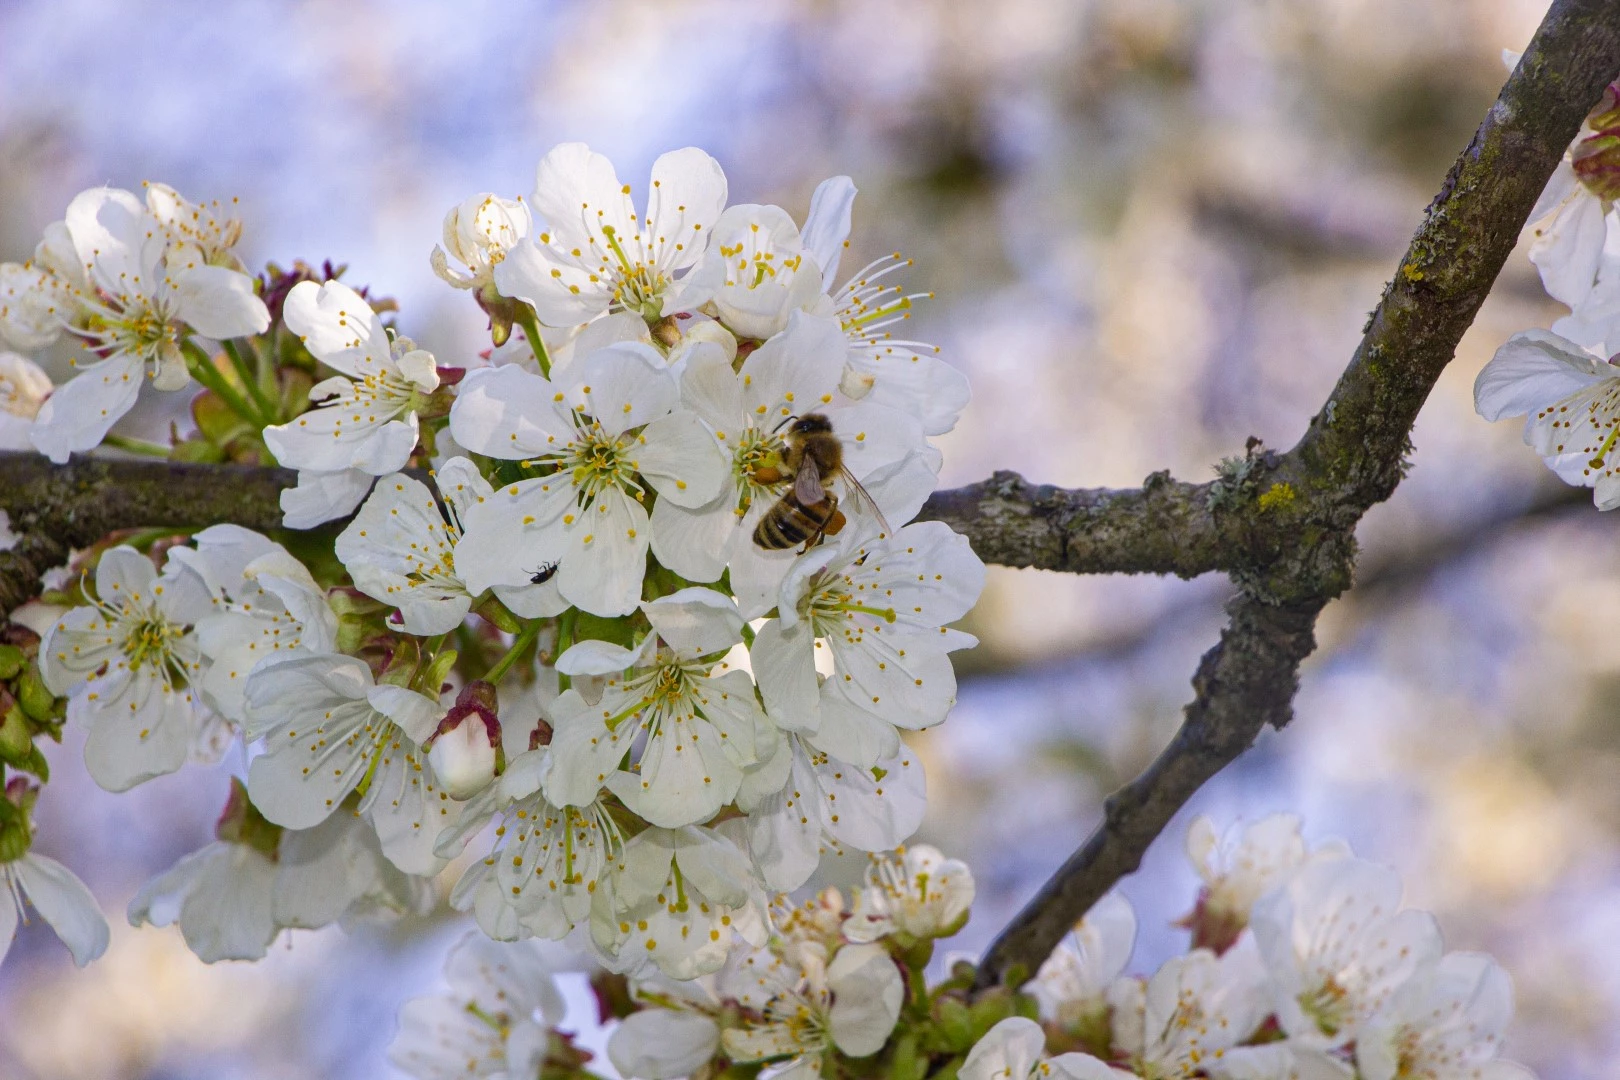 photography of a bee sitting on a cherry blossom tree